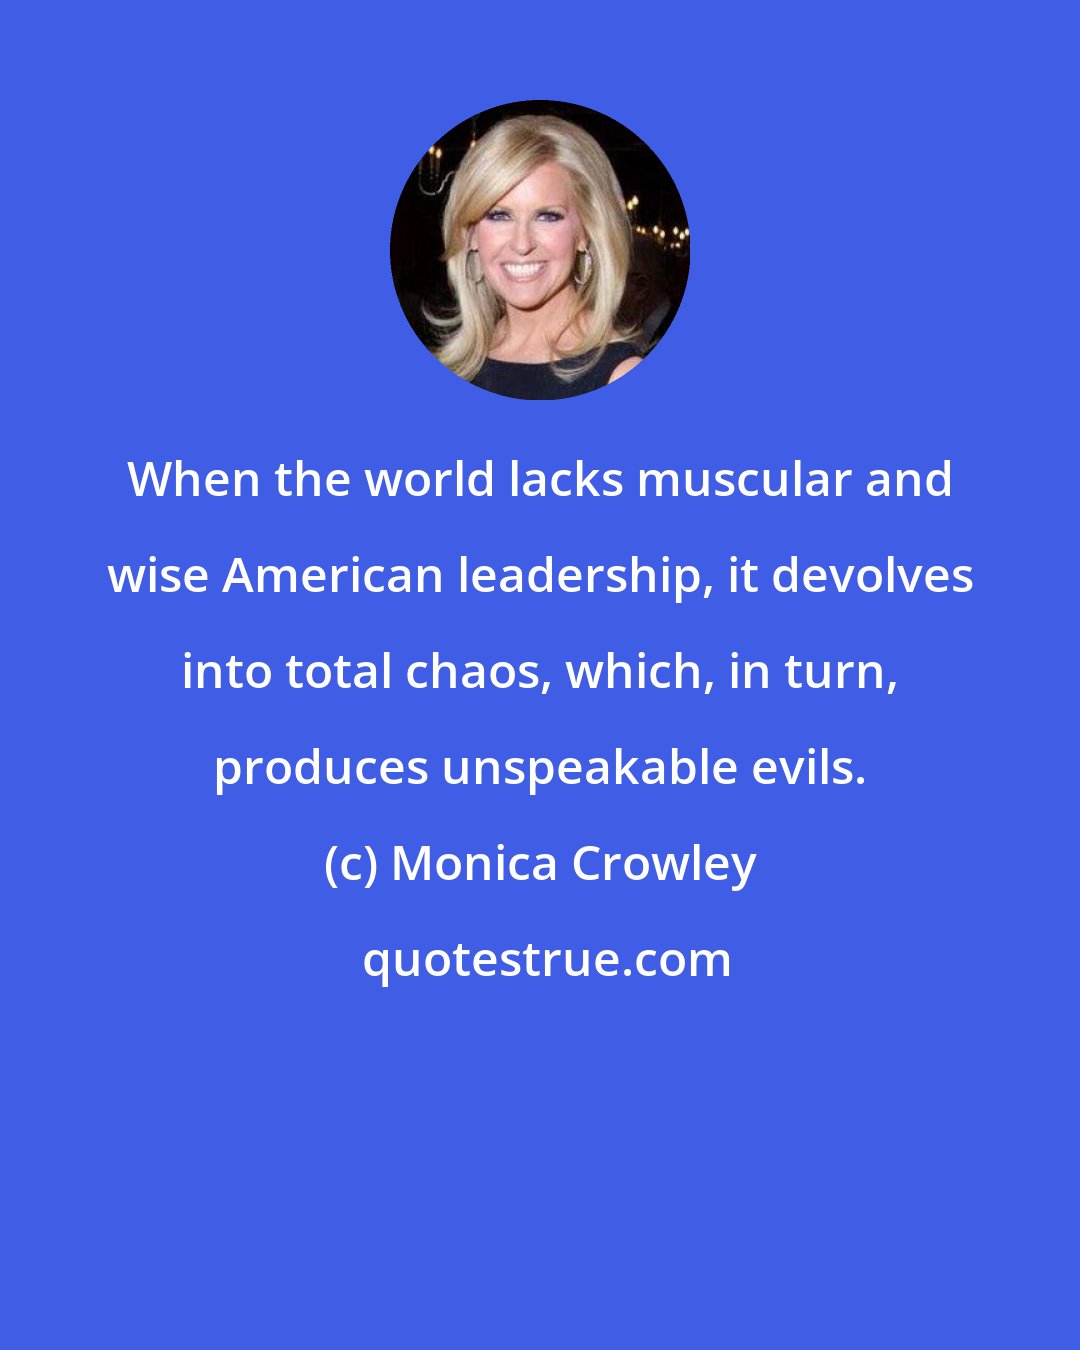 Monica Crowley: When the world lacks muscular and wise American leadership, it devolves into total chaos, which, in turn, produces unspeakable evils.